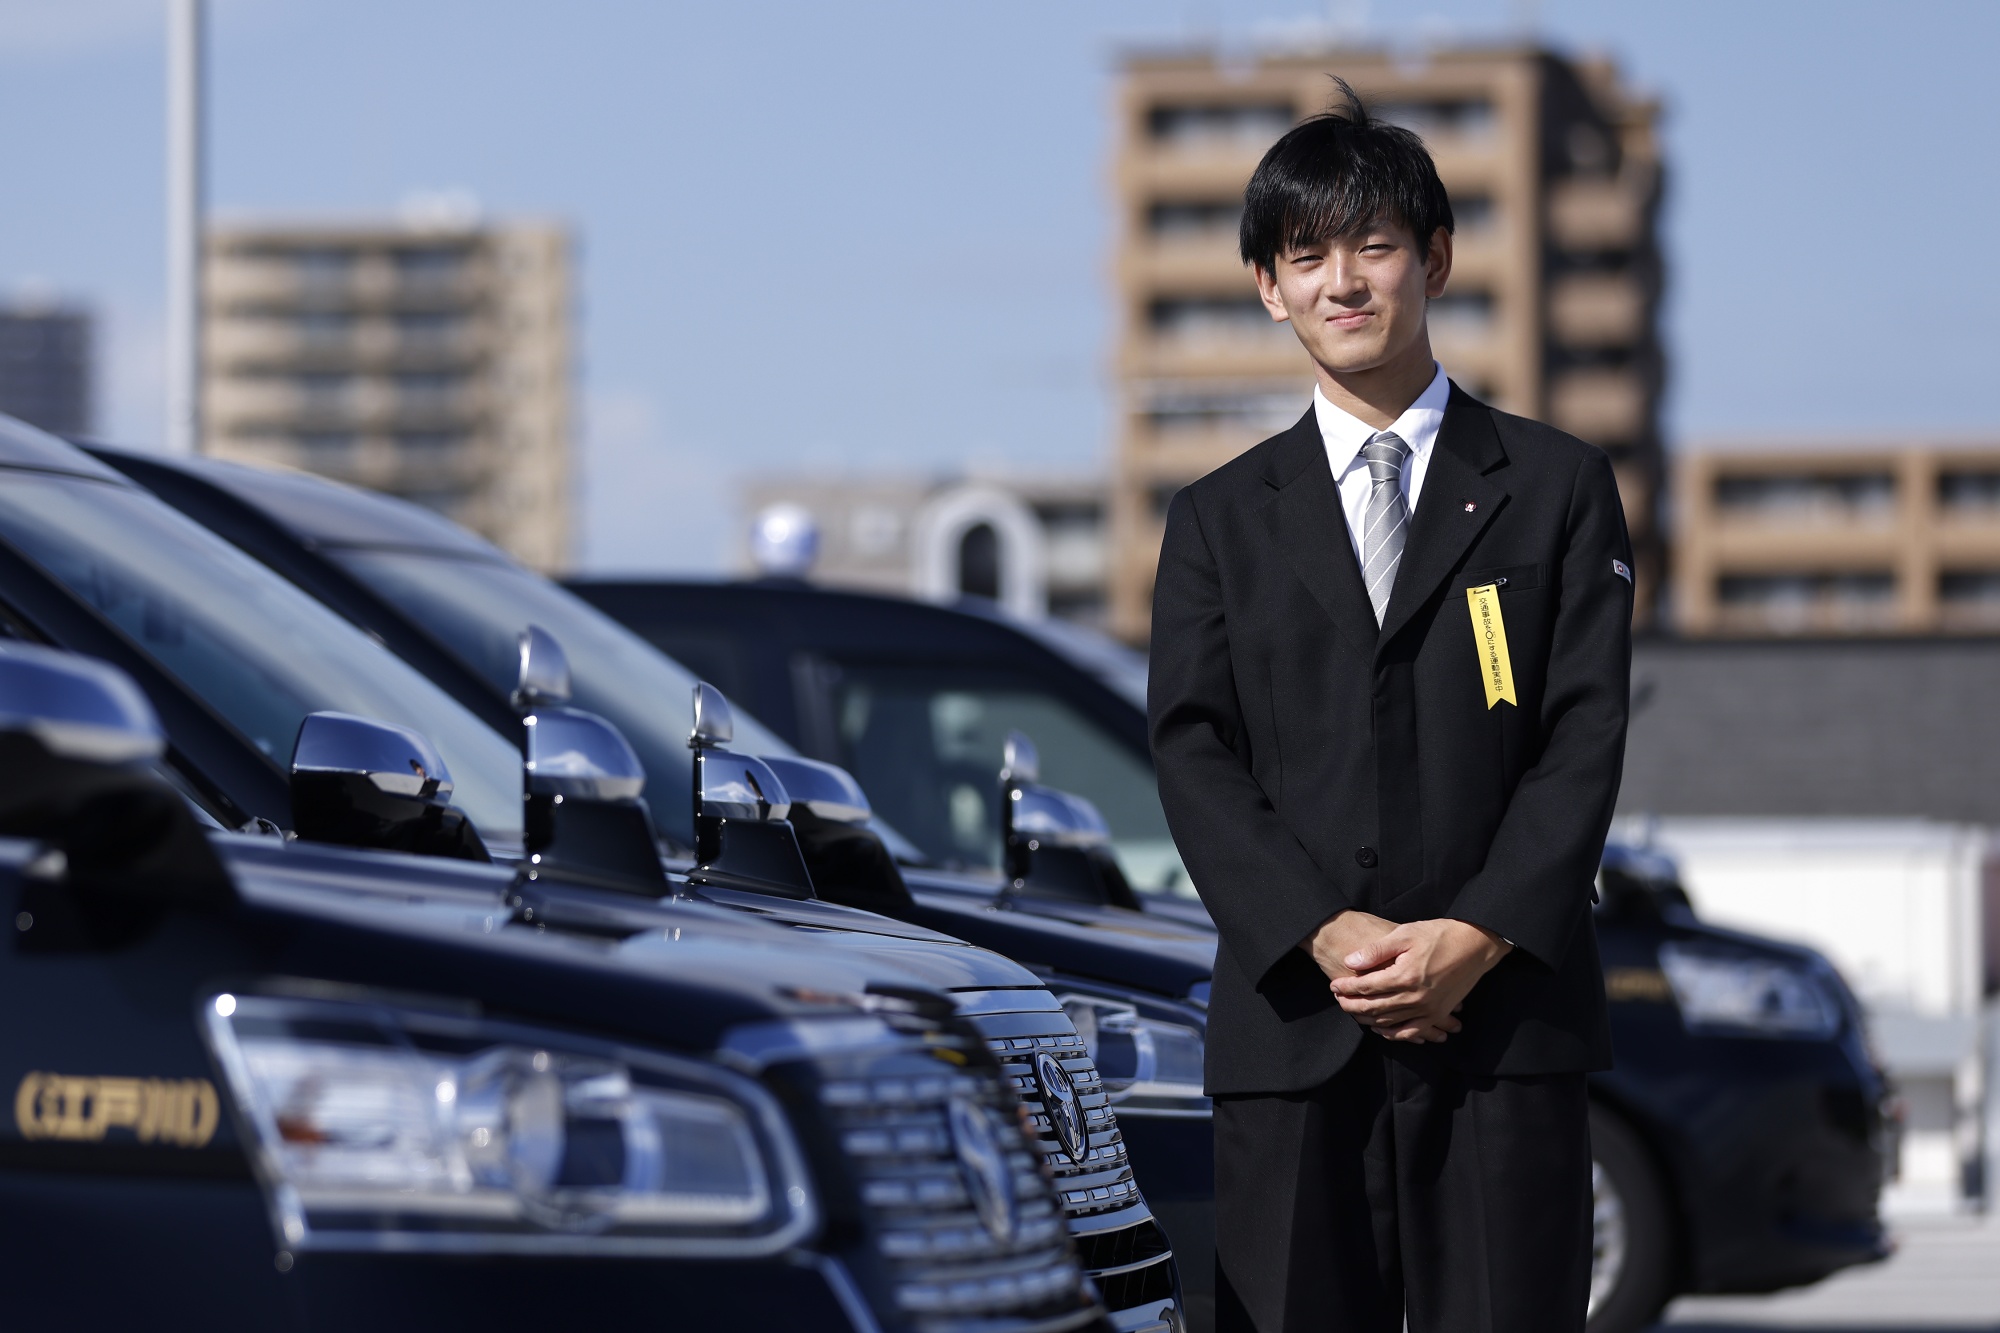 Japan Taxi Firms Recruit New College Graduates to Fill Driver